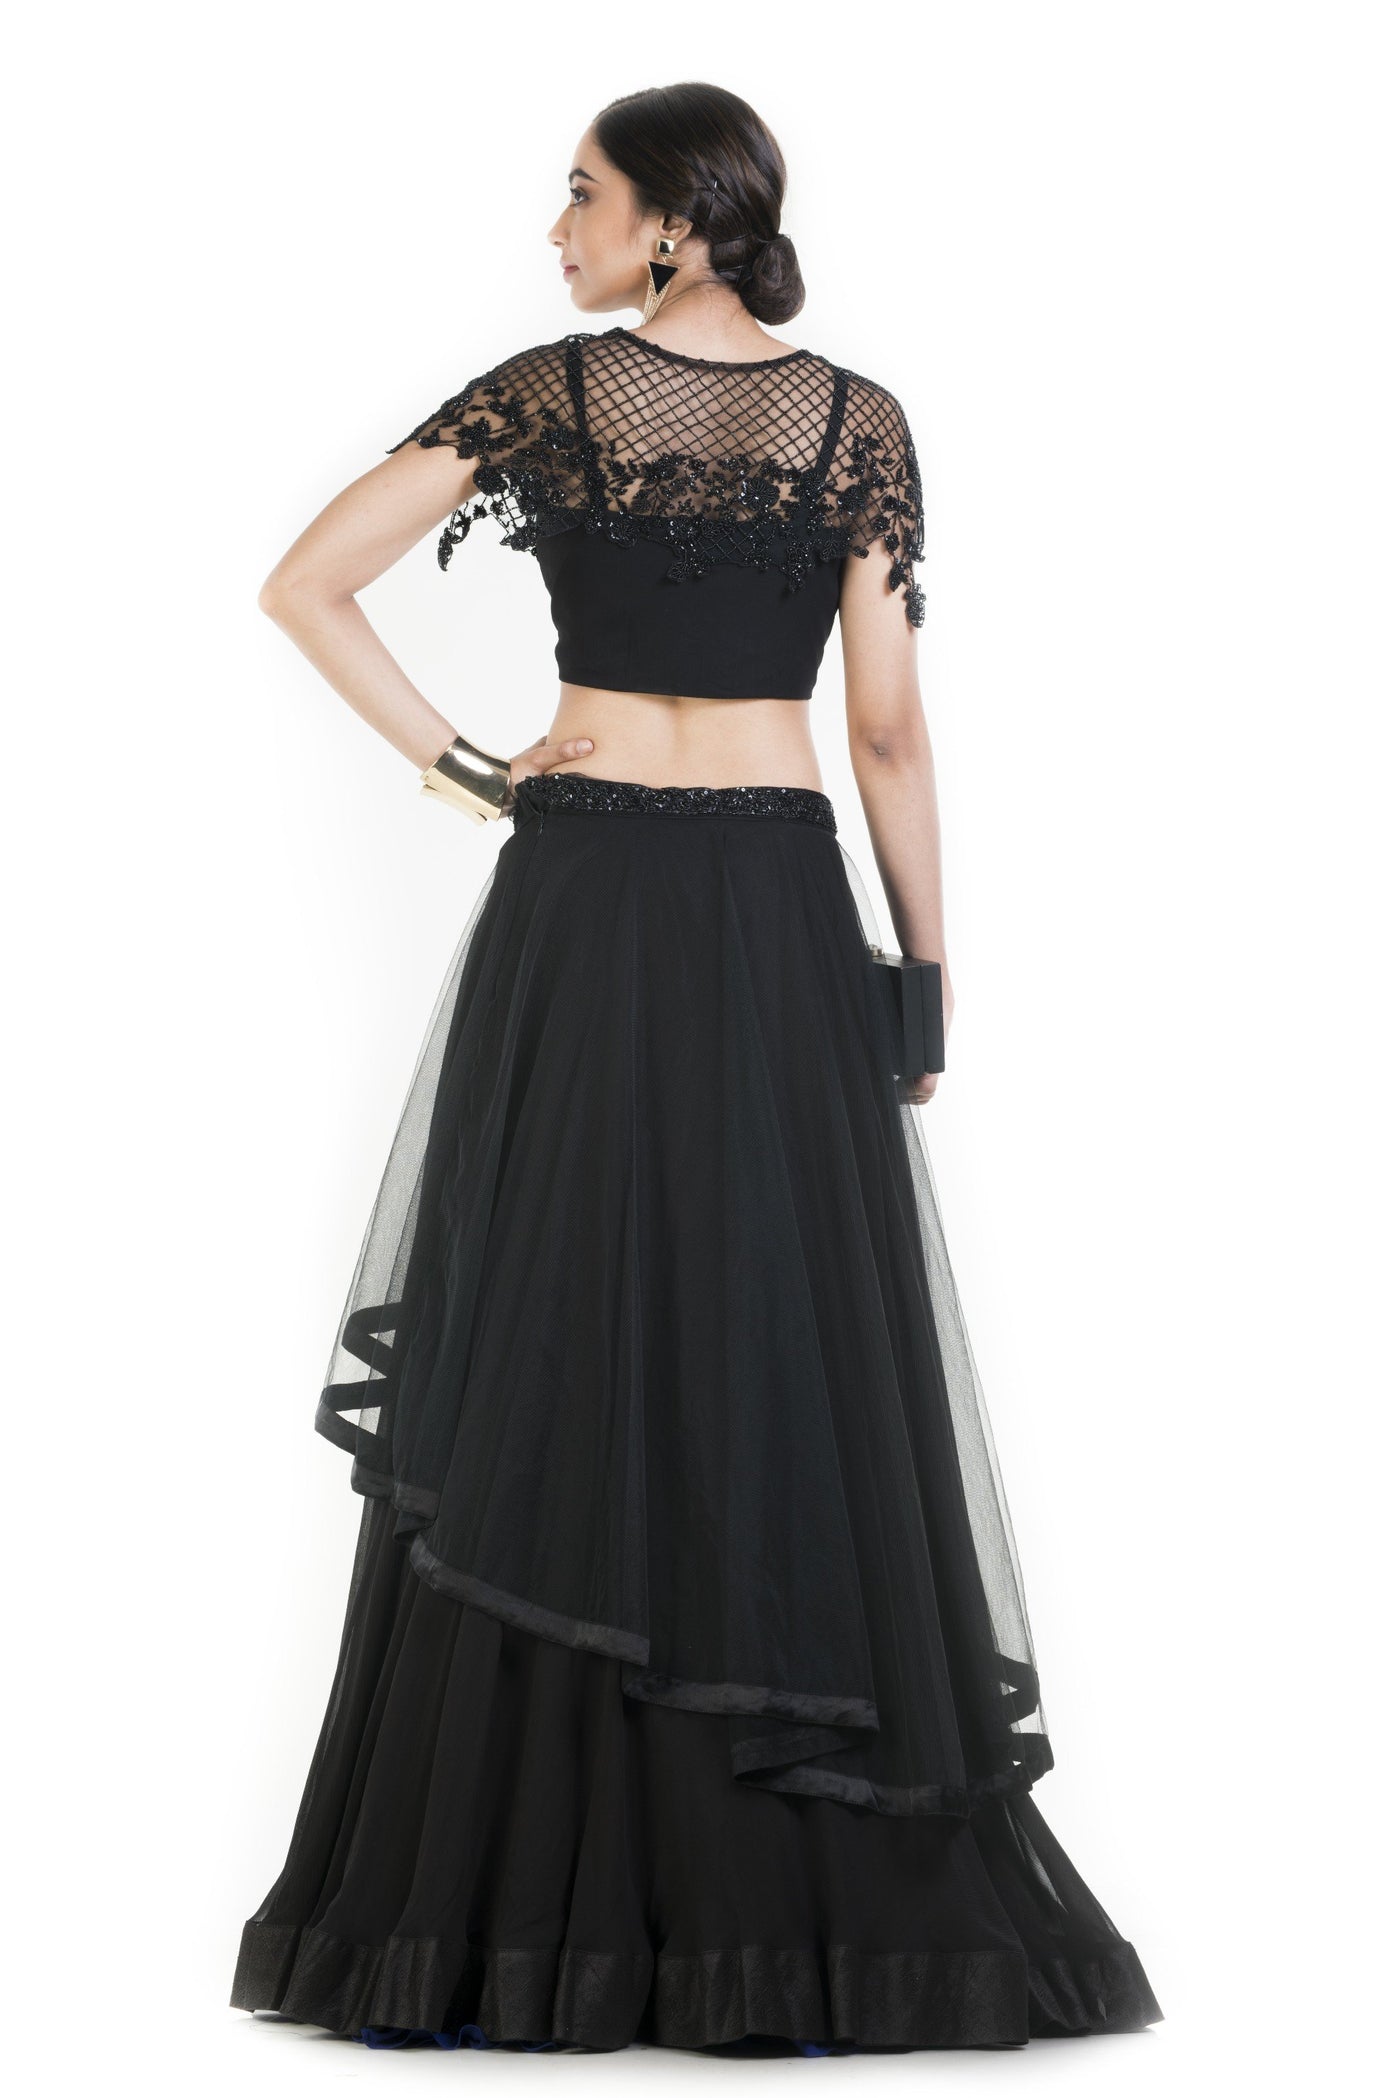 BLACK LEHENGA FEATURE - Indian Clothing in Denver, CO, Aurora, CO, Boulder, CO, Fort Collins, CO, Colorado Springs, CO, Parker, CO, Highlands Ranch, CO, Cherry Creek, CO, Centennial, CO, and Longmont, CO. Nationwide shipping USA - India Fashion X